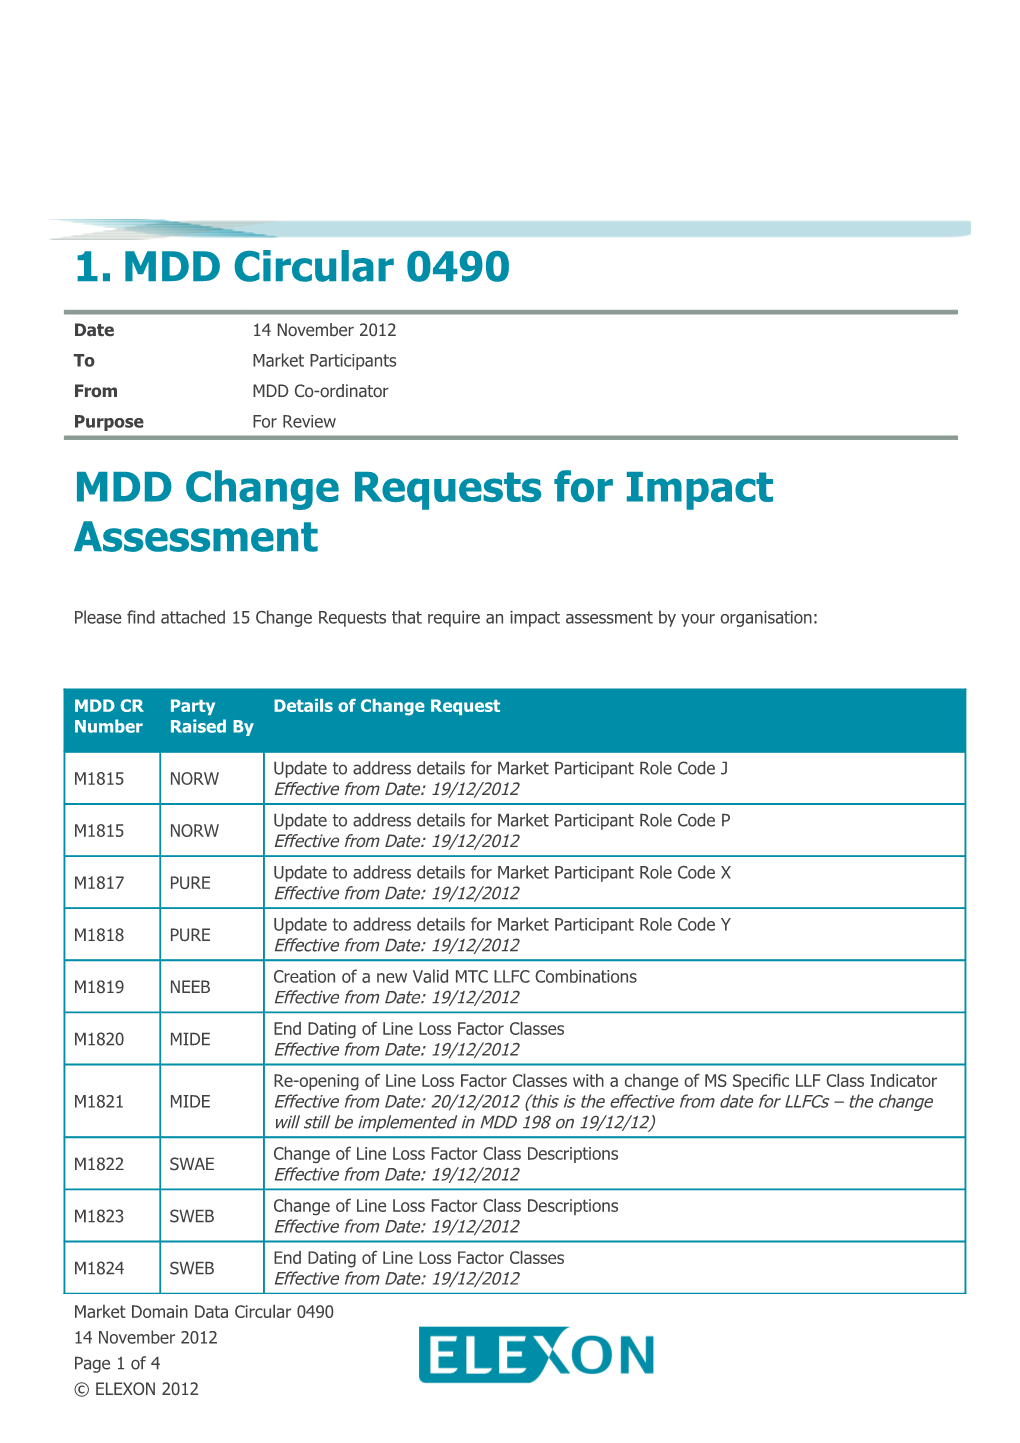 MDD Change Requests for Impact Assessment s3